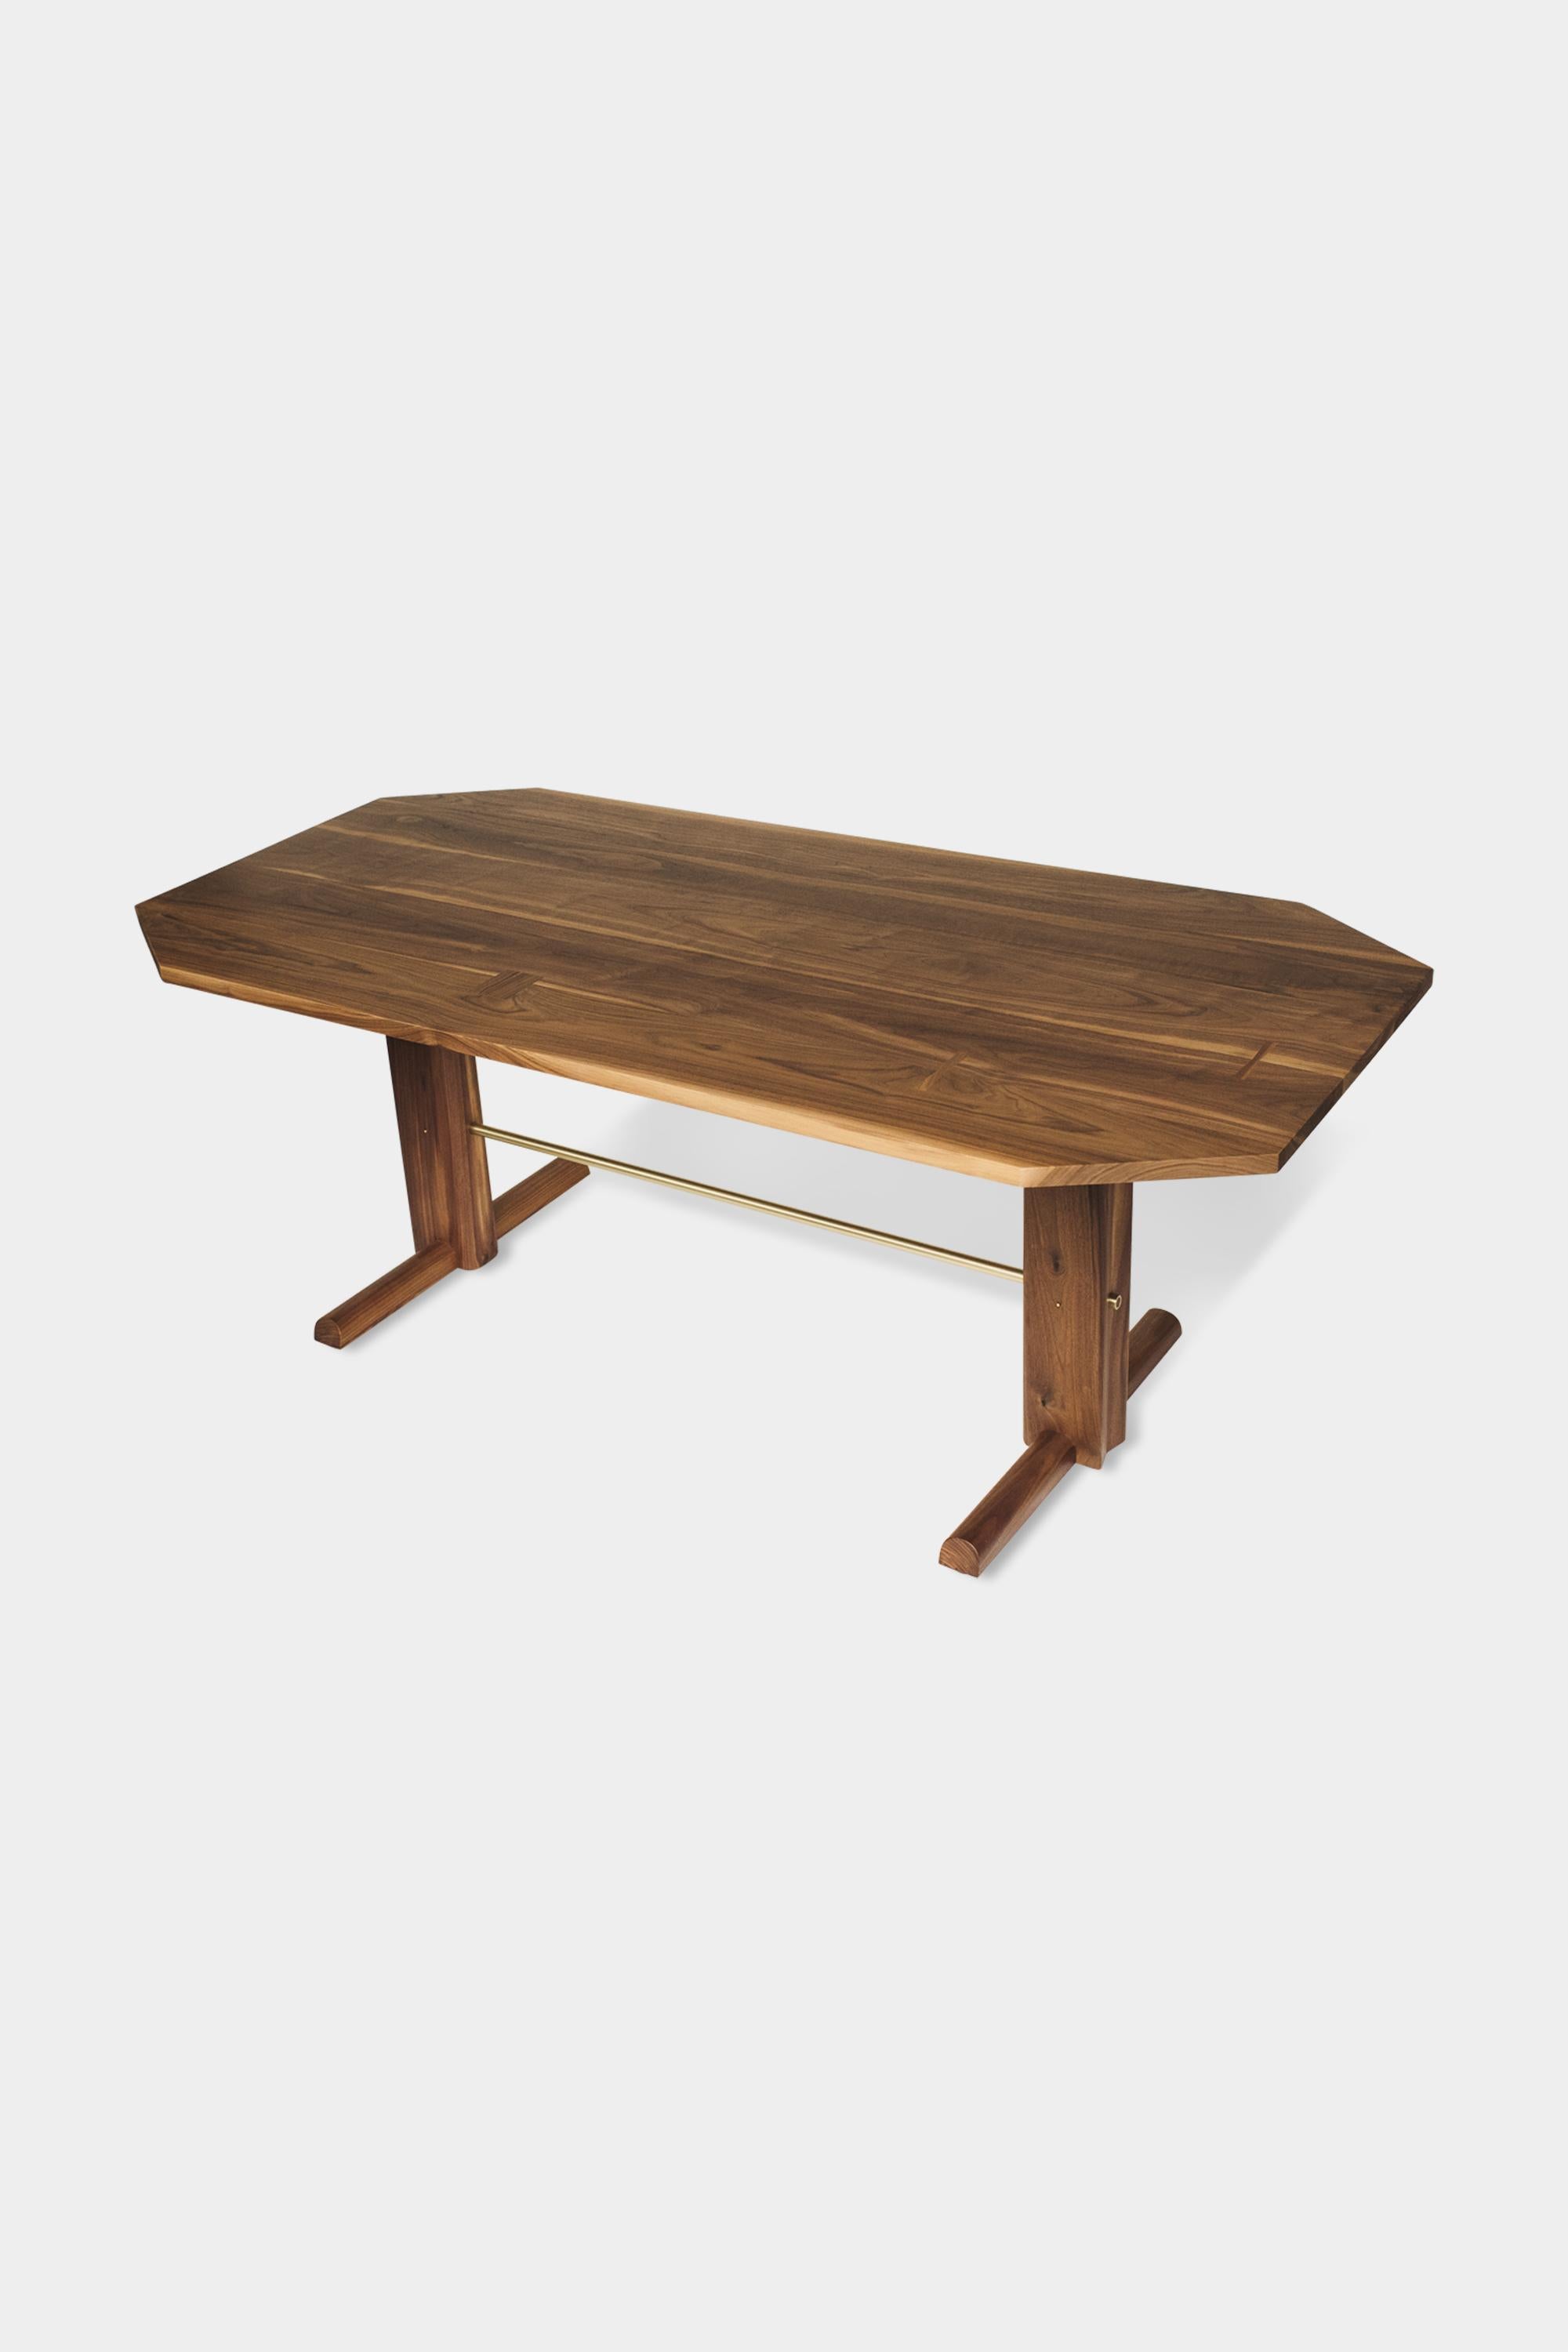 American Clipped Corner BRIG Dining Table in Walnut For Sale